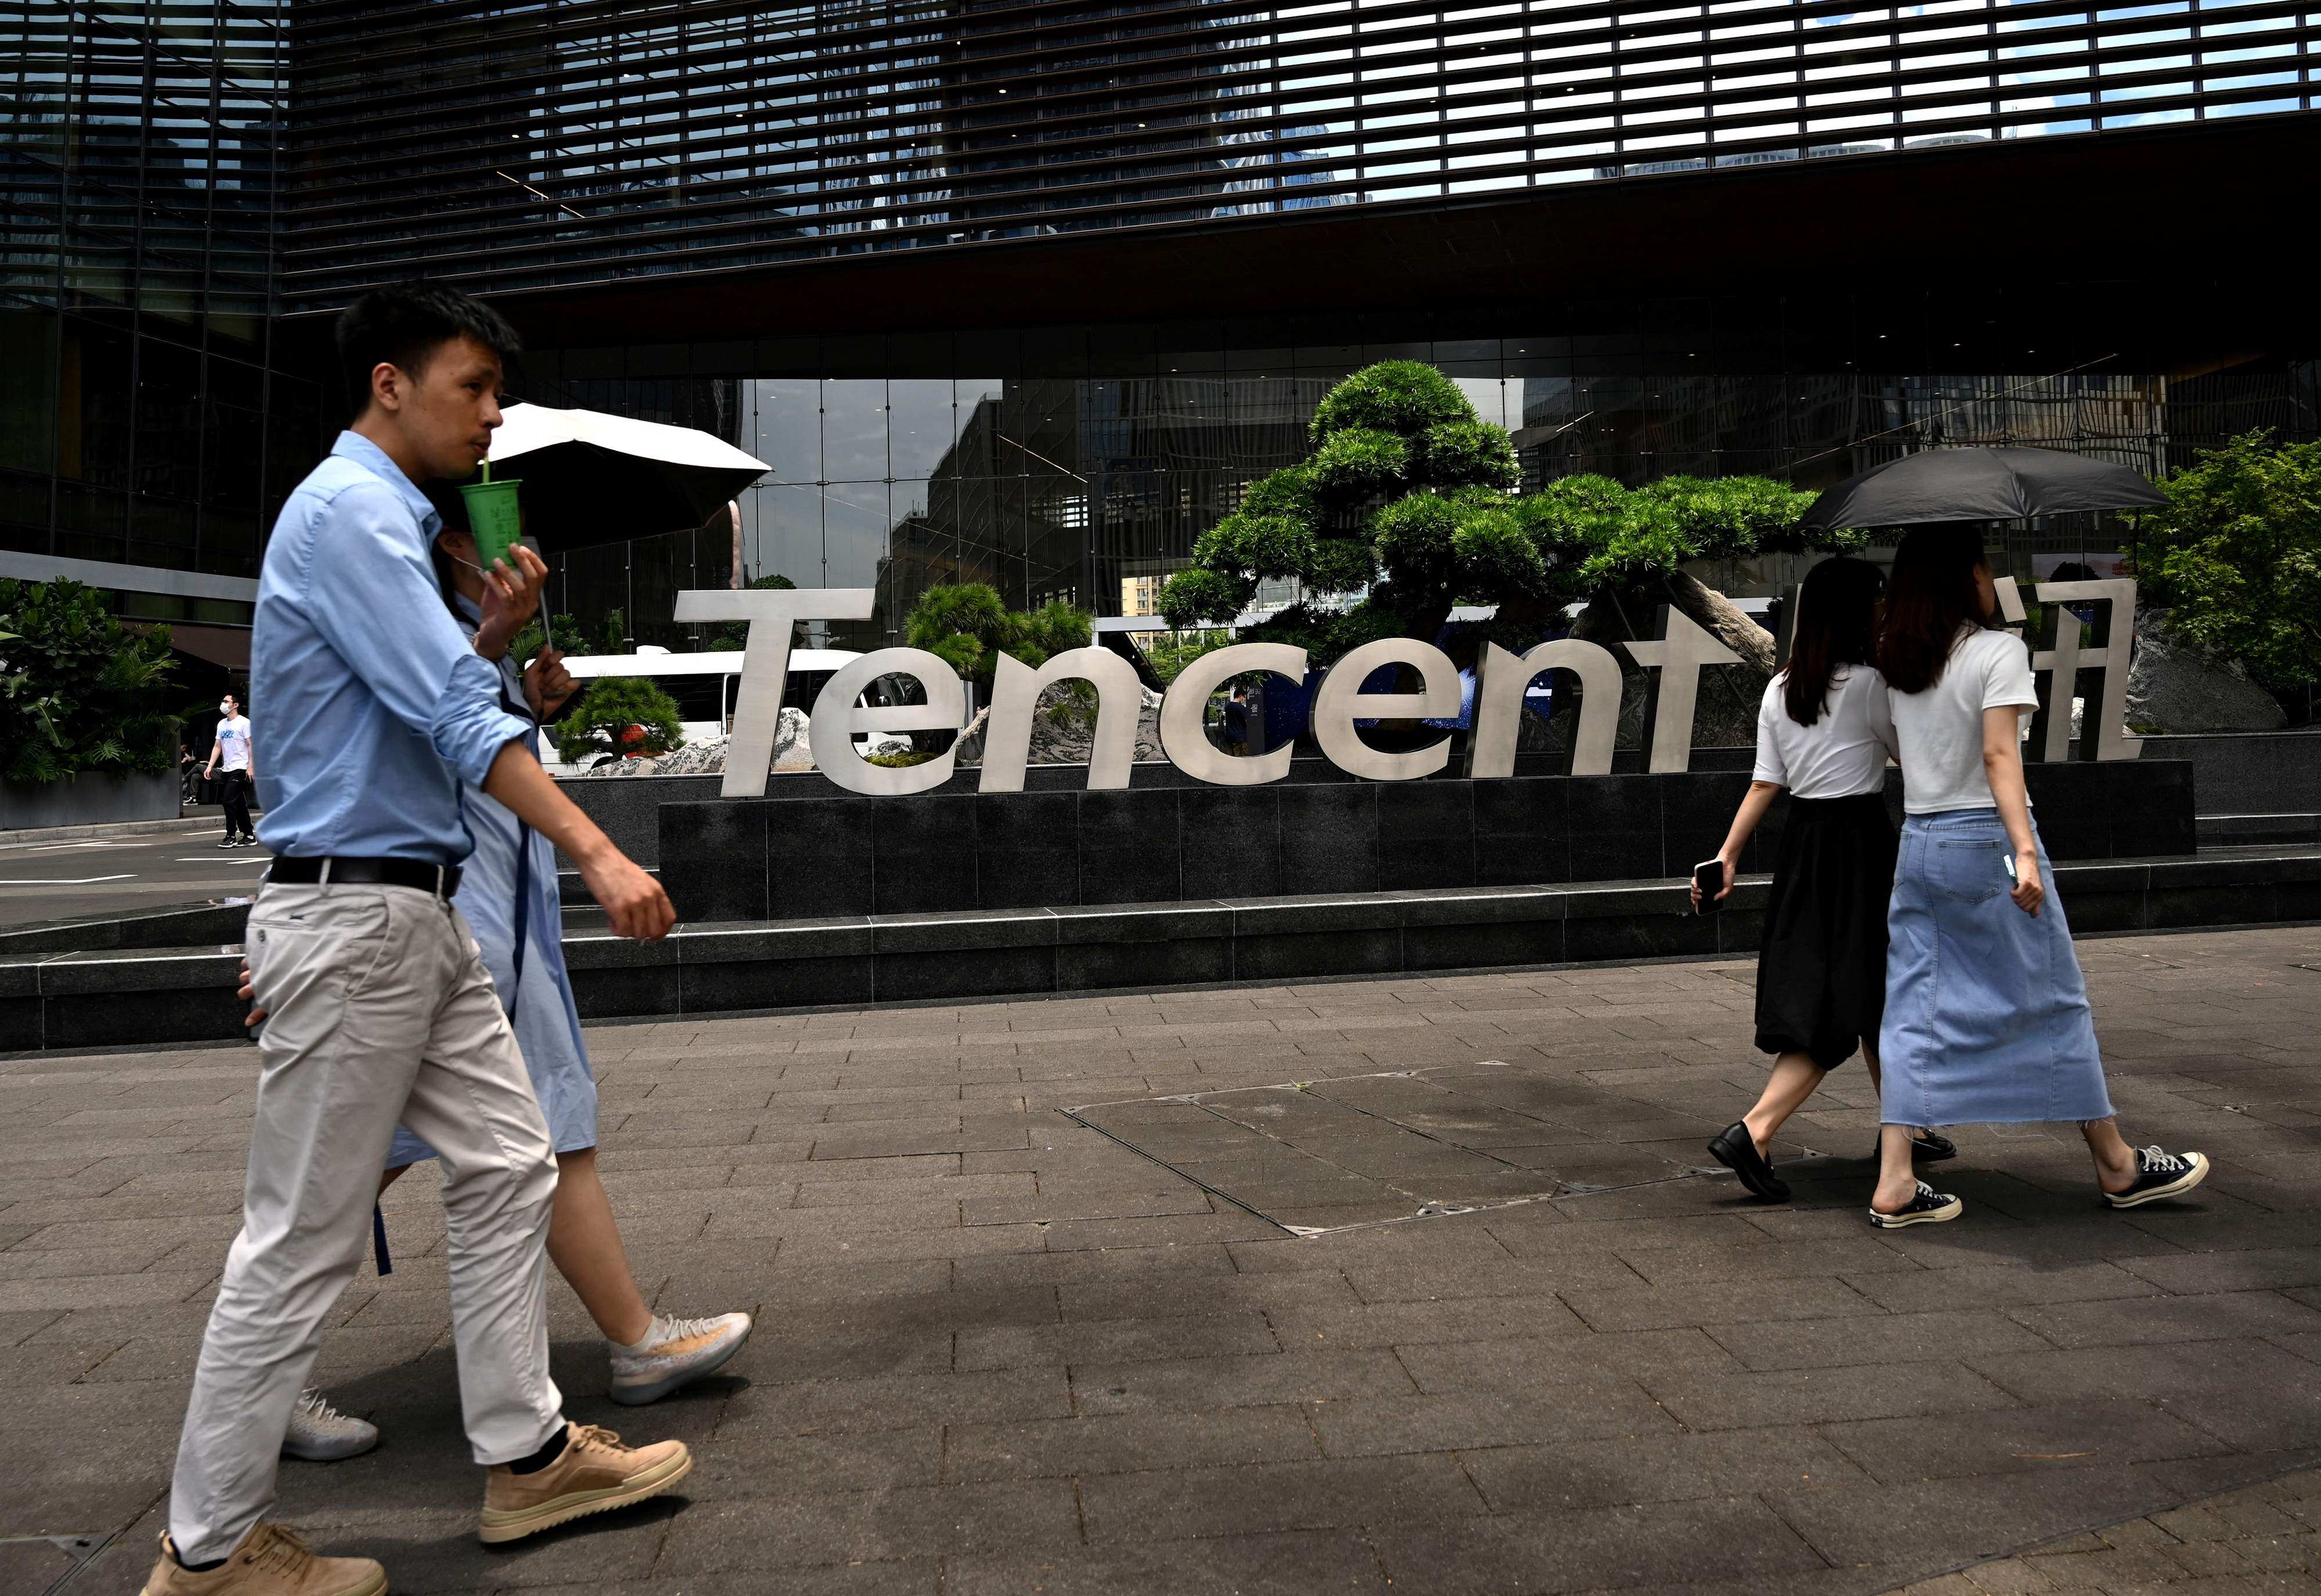 Tencent, Alibaba and Didi, among others, have been fined by antitrust regulators for failing to disclose past mergers and acquisitions. Photo: AFP